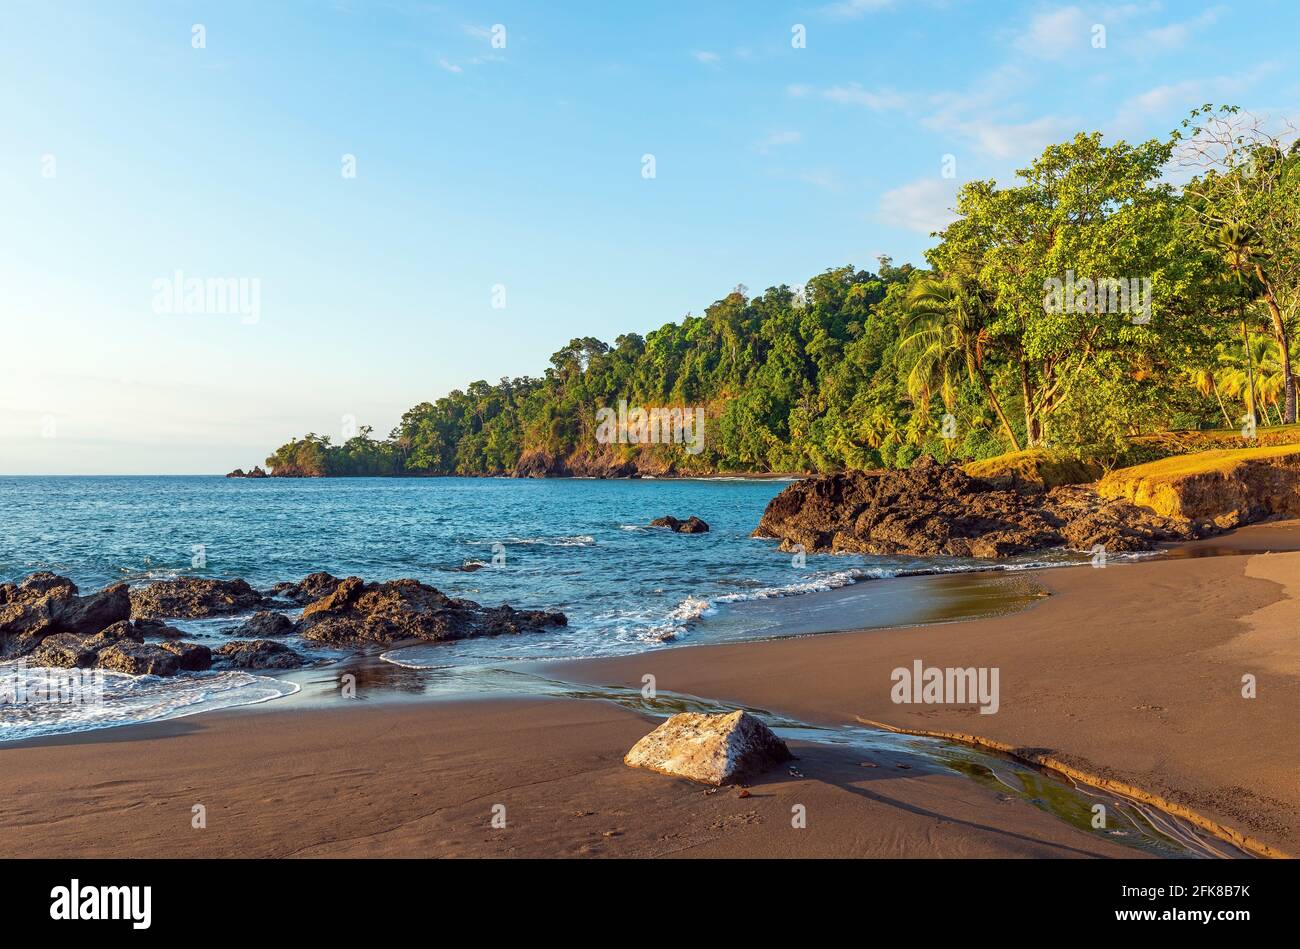 Tropical rainforest beach at sunset by Pacific Ocean, Corcovado national park, Costa Rica. Stock Photo